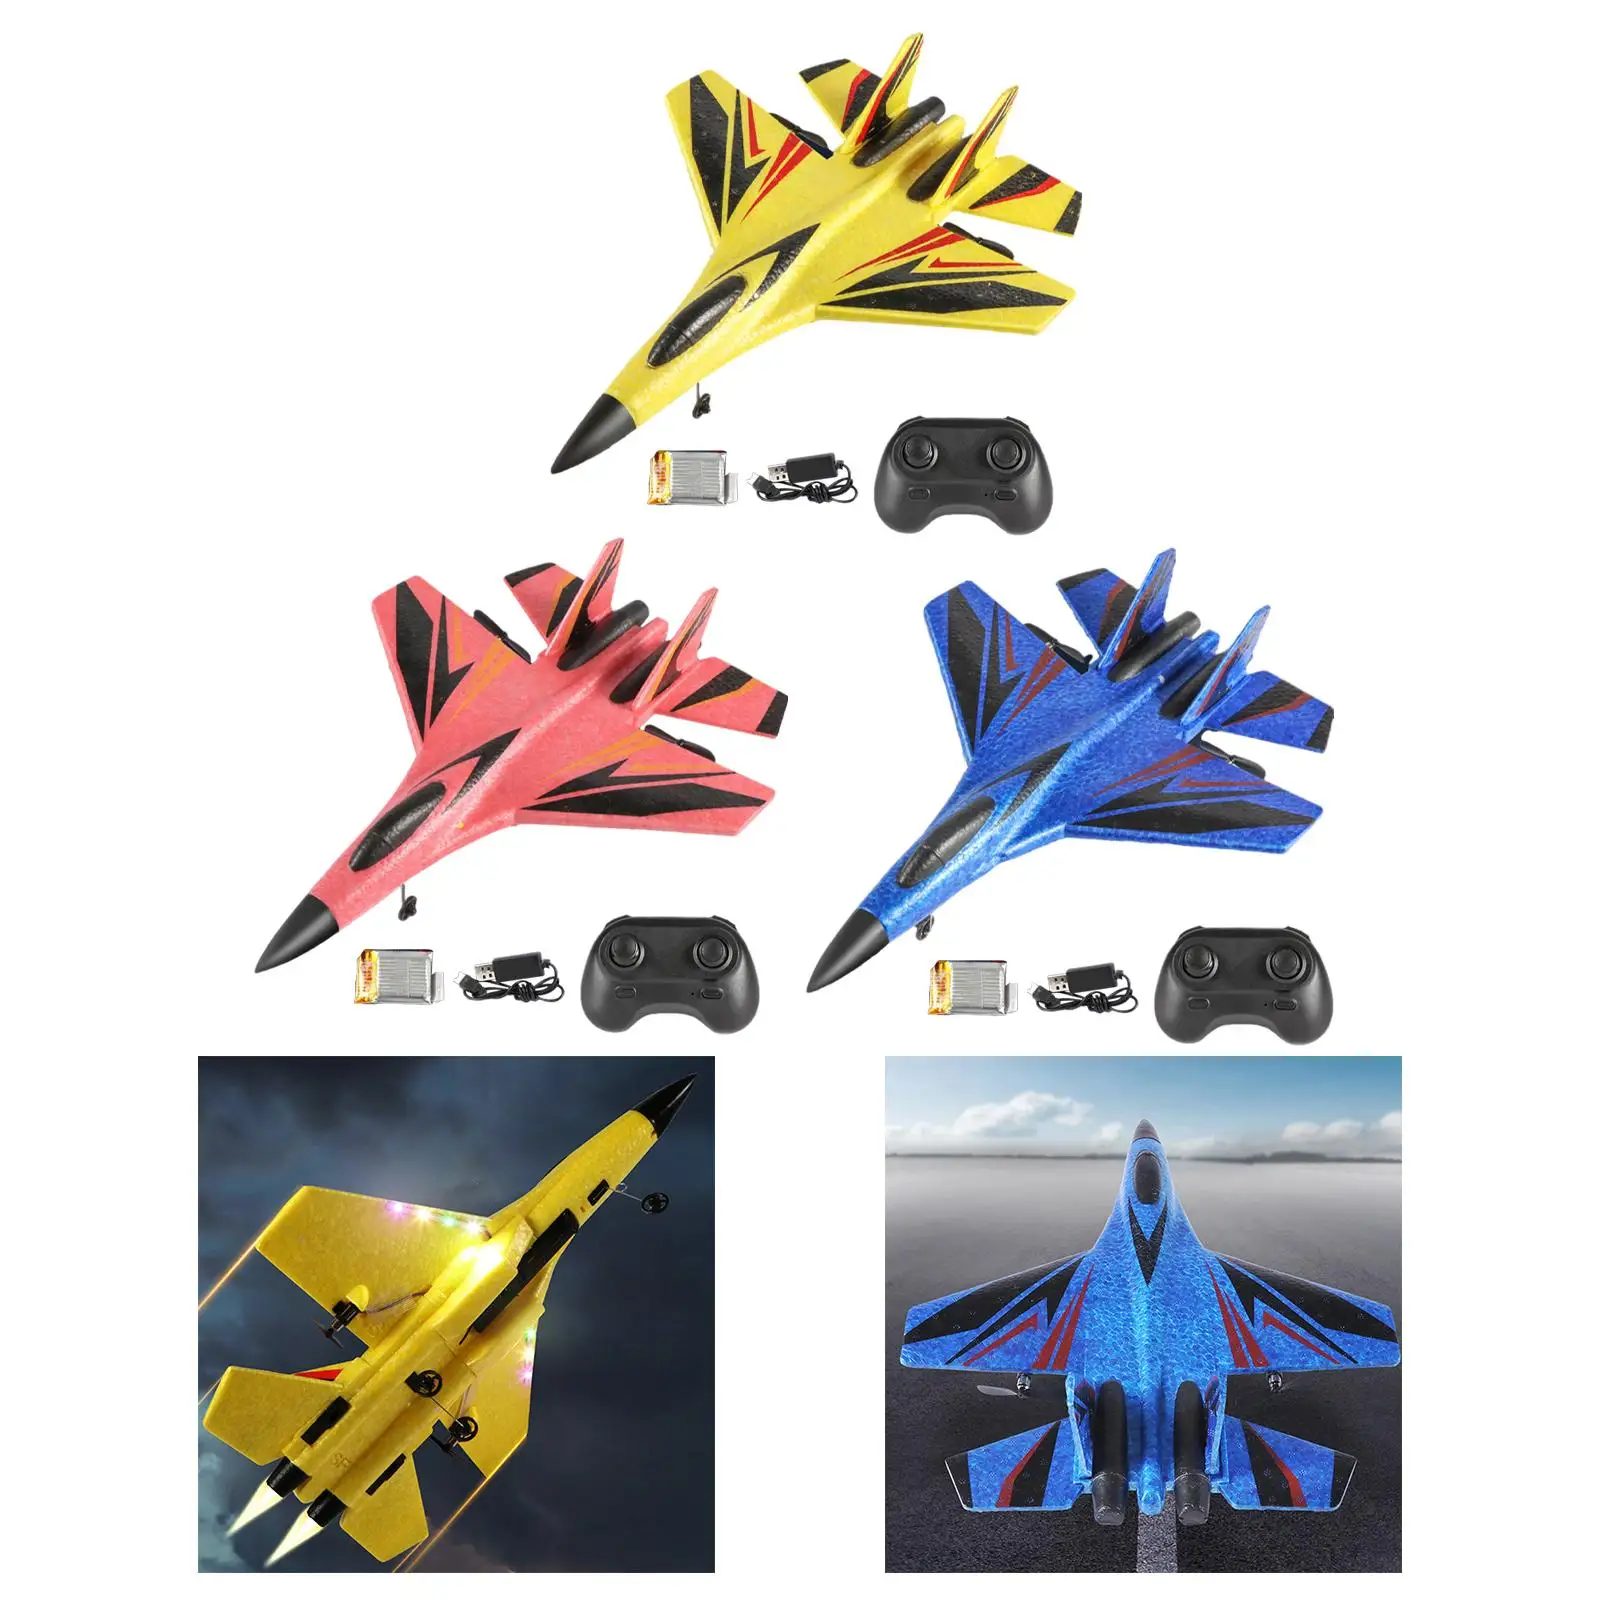 Foam RC Glider SU30 Aircraft Model Toys Glider Fighter Toys Remote Control Aircraft for Children Kids Boys Girls Birthday Gifts